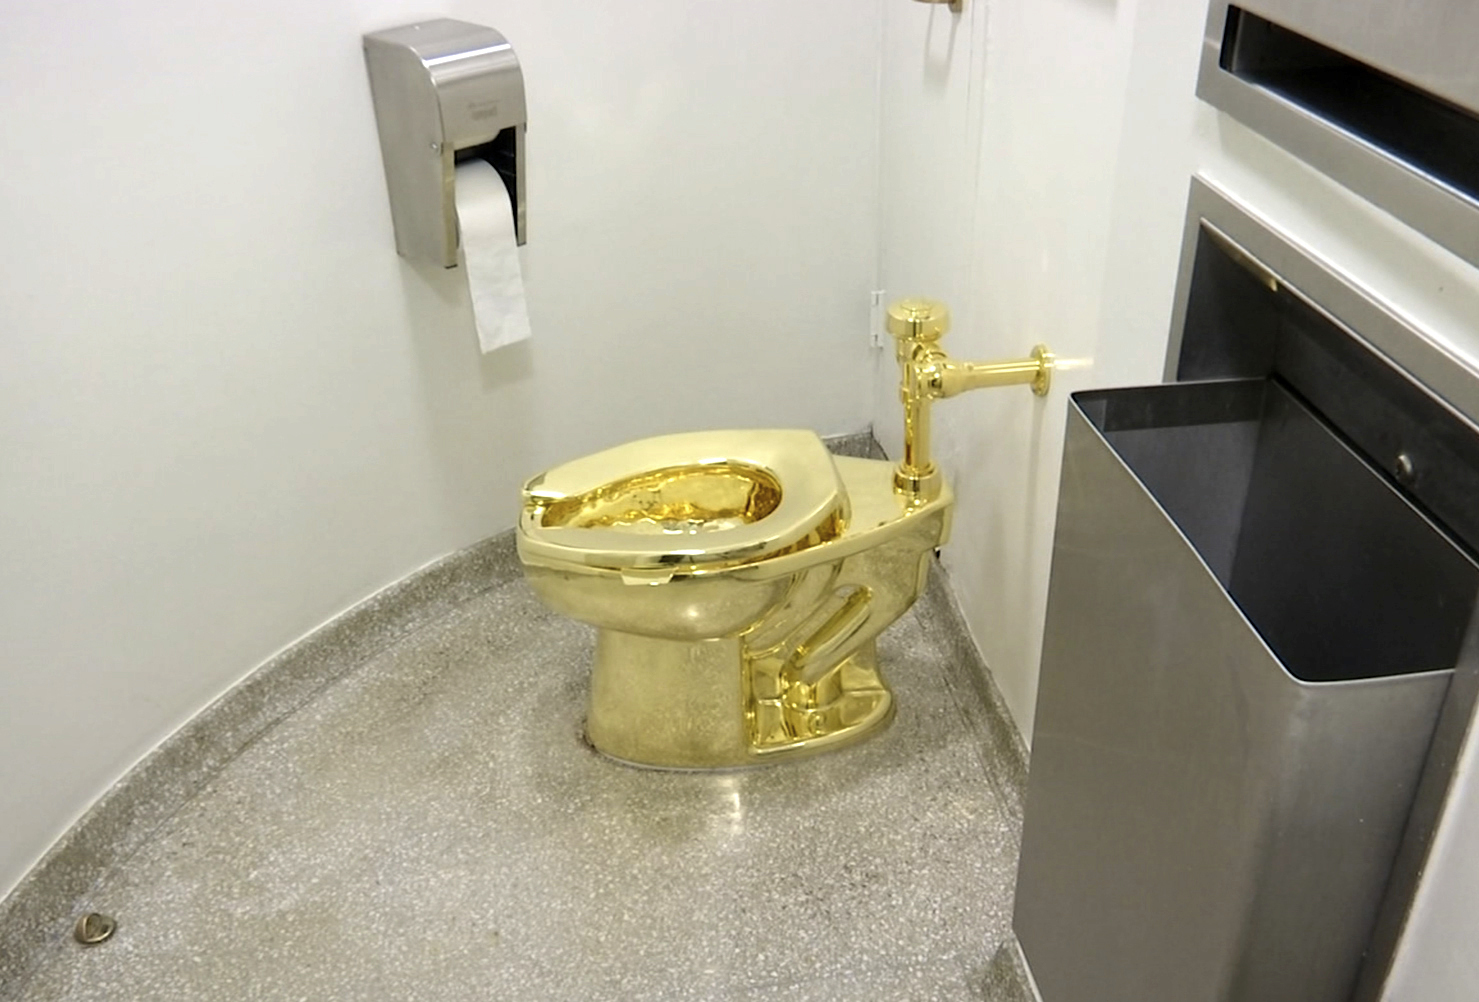 PHOTO: FILE - This Sept. 16, 2016 file image made from a video shows the 18-karat toilet, titled "America," by Maurizio Cattelan in the restroom of the Solomon R. Guggenheim Museum in New York.